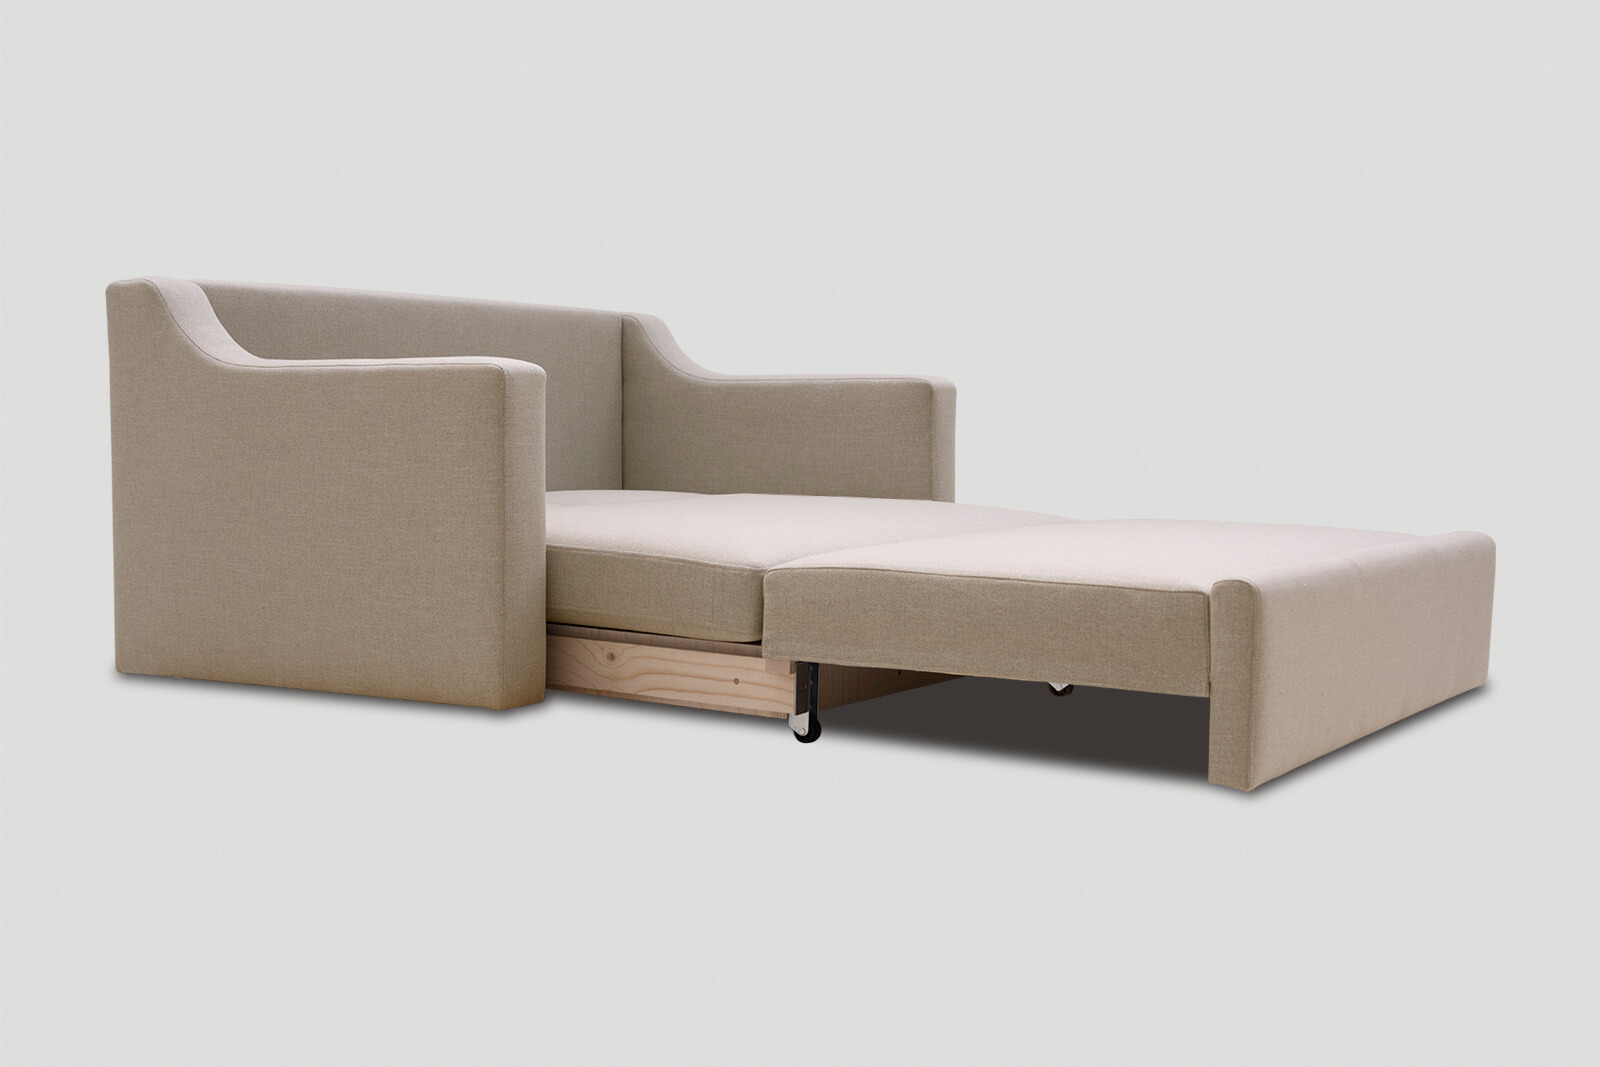 HBSB02-double-sofa-bed-coconut-3q-bed